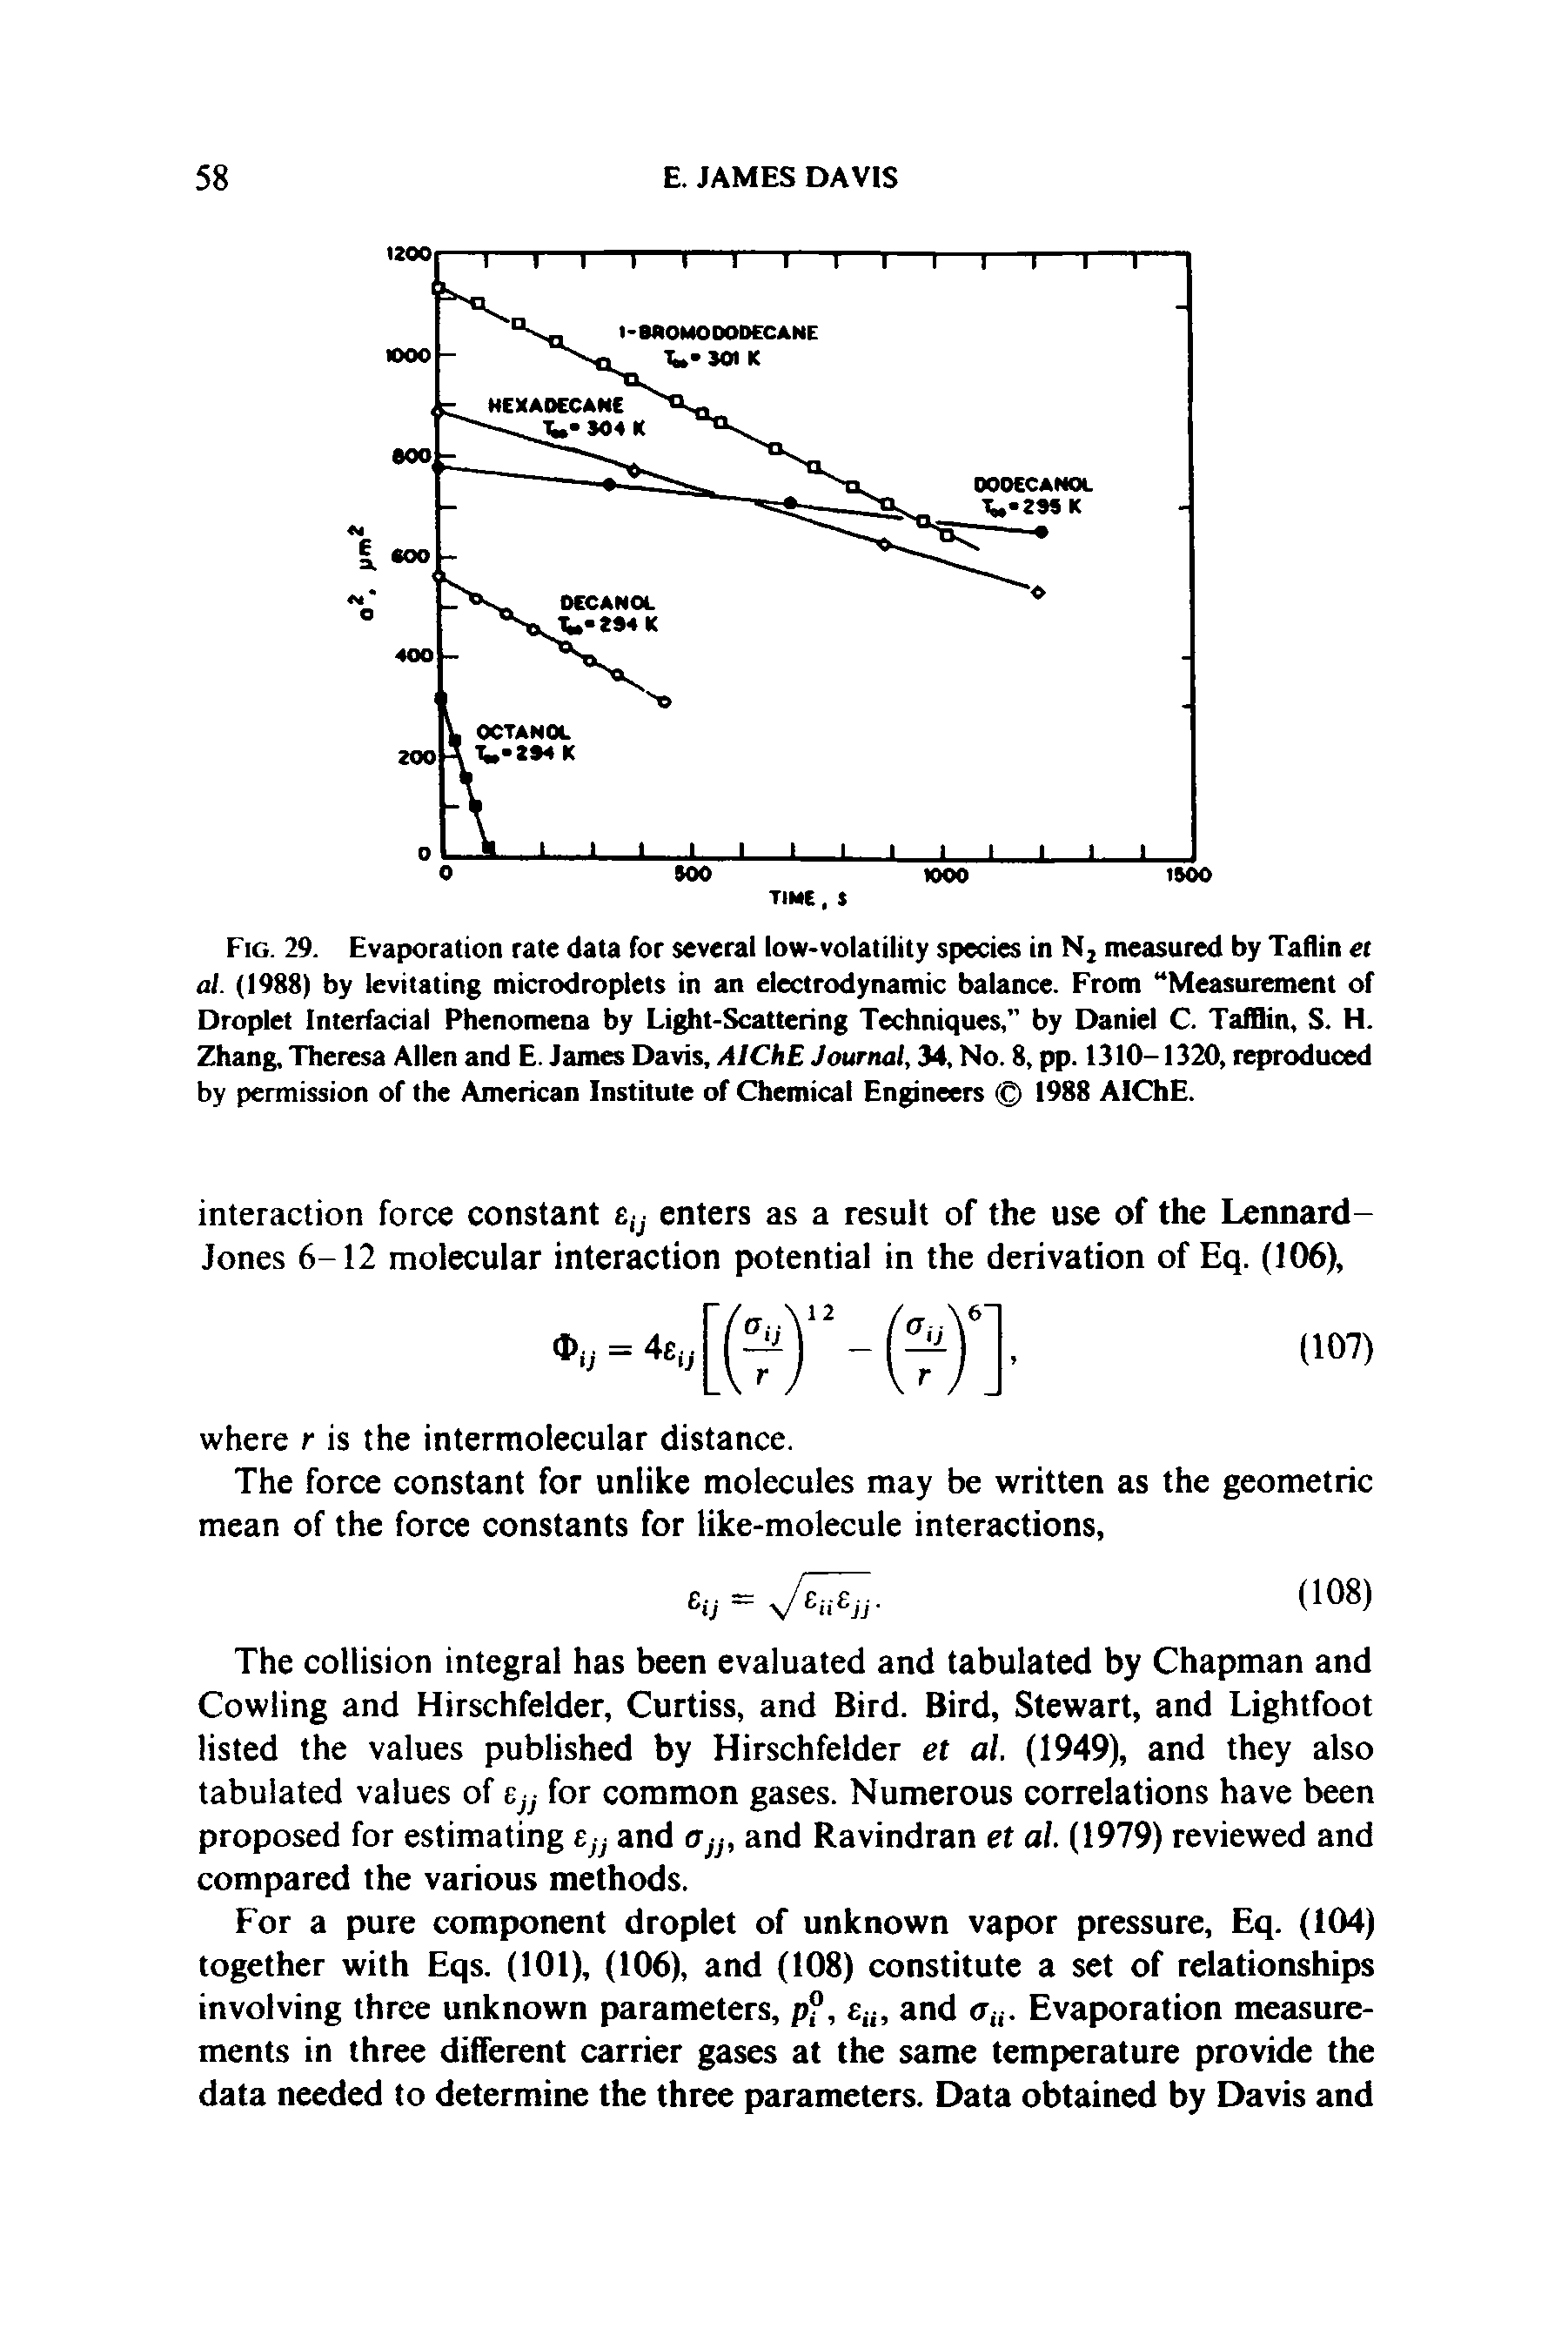 Fig. 29. Evaporation rate data for several low-volatility species in Nj measured by Tallin et al. (1988) by levitating microdroplets in an electrodynamic balance. From Measurement of Droplet Interfacial Phenomena by Light-Scattering Techniques, by Daniel C. TafBin, S. FI. Zhang, Theresa Allen and E. James Davis, A/CIiE Journo/, 34, No. 8, pp. 1310-1320, reproduced by permission of the American Institute of Chemical Engineers 1988 AIChE.